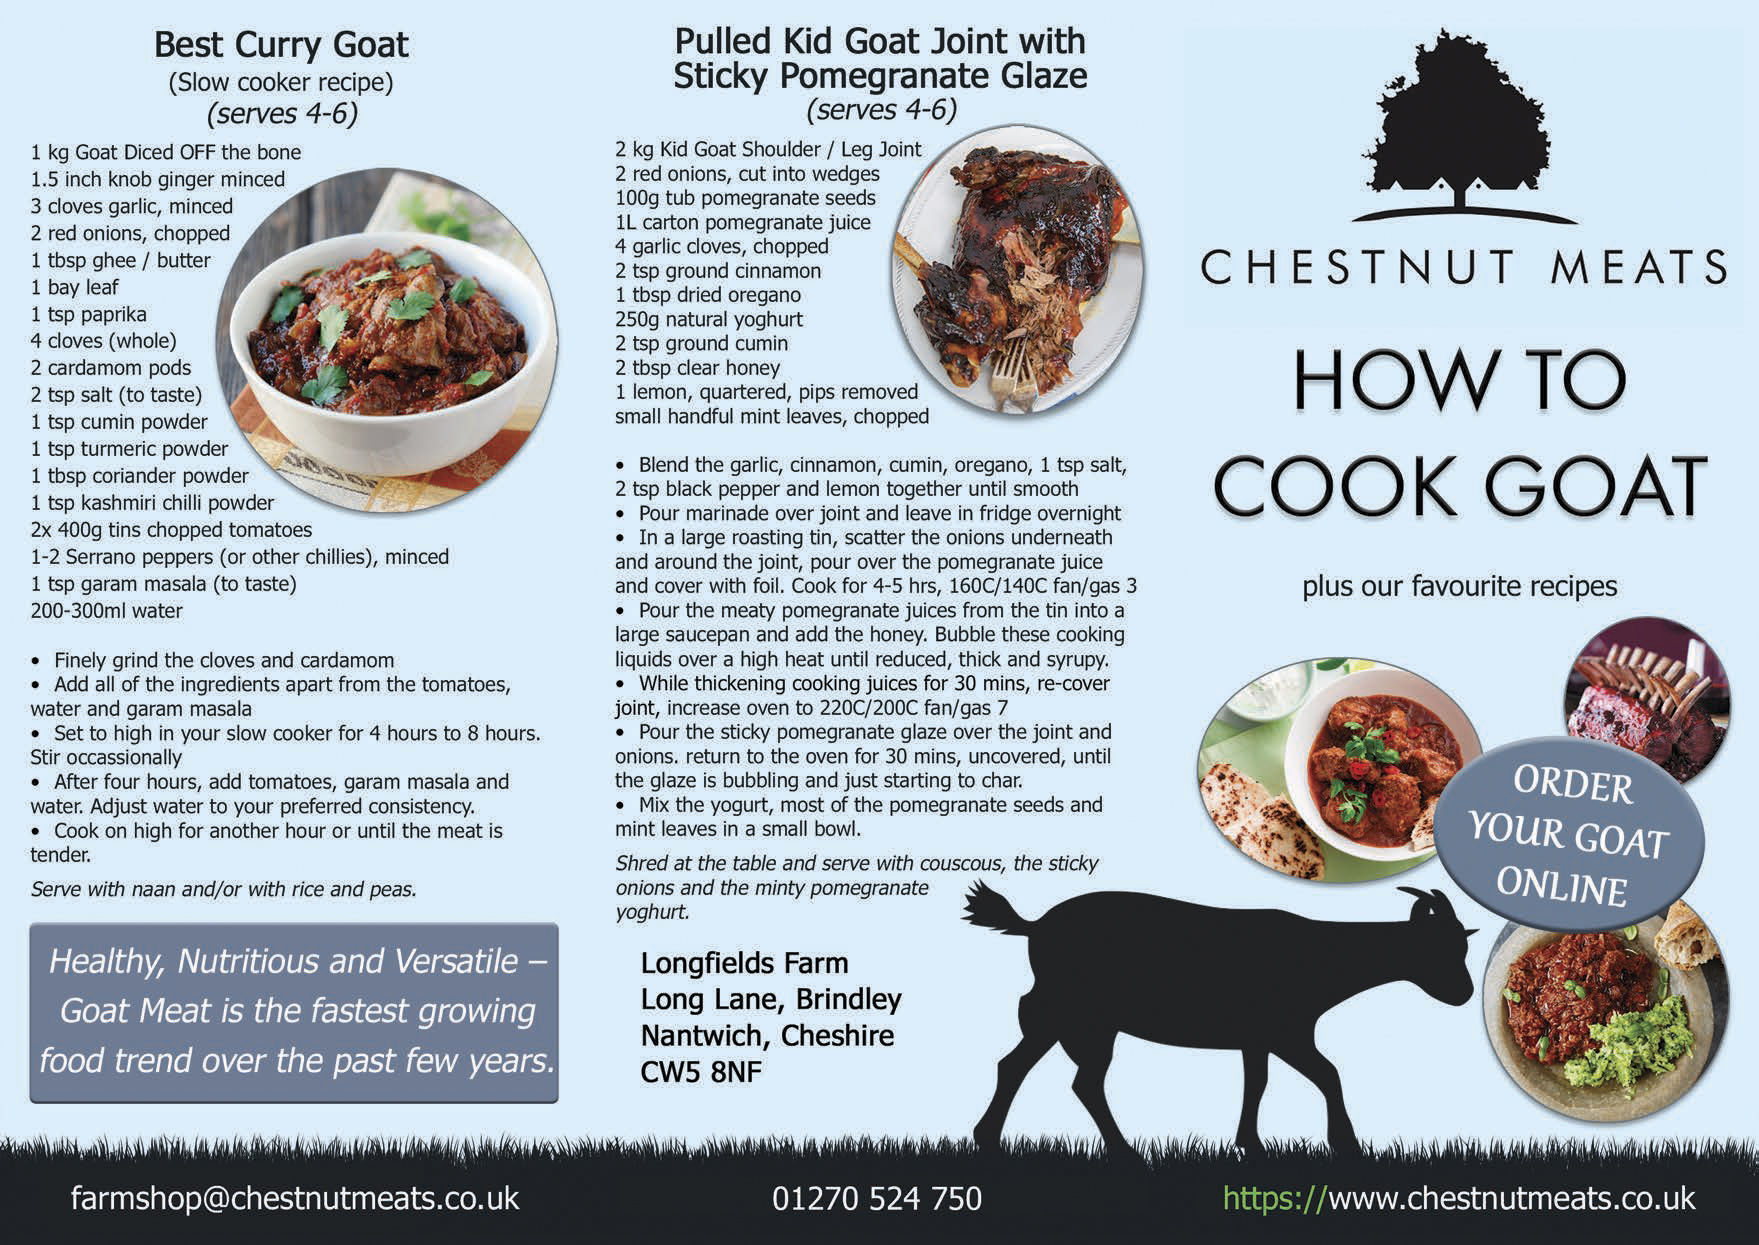 how to cook goat leaflet2